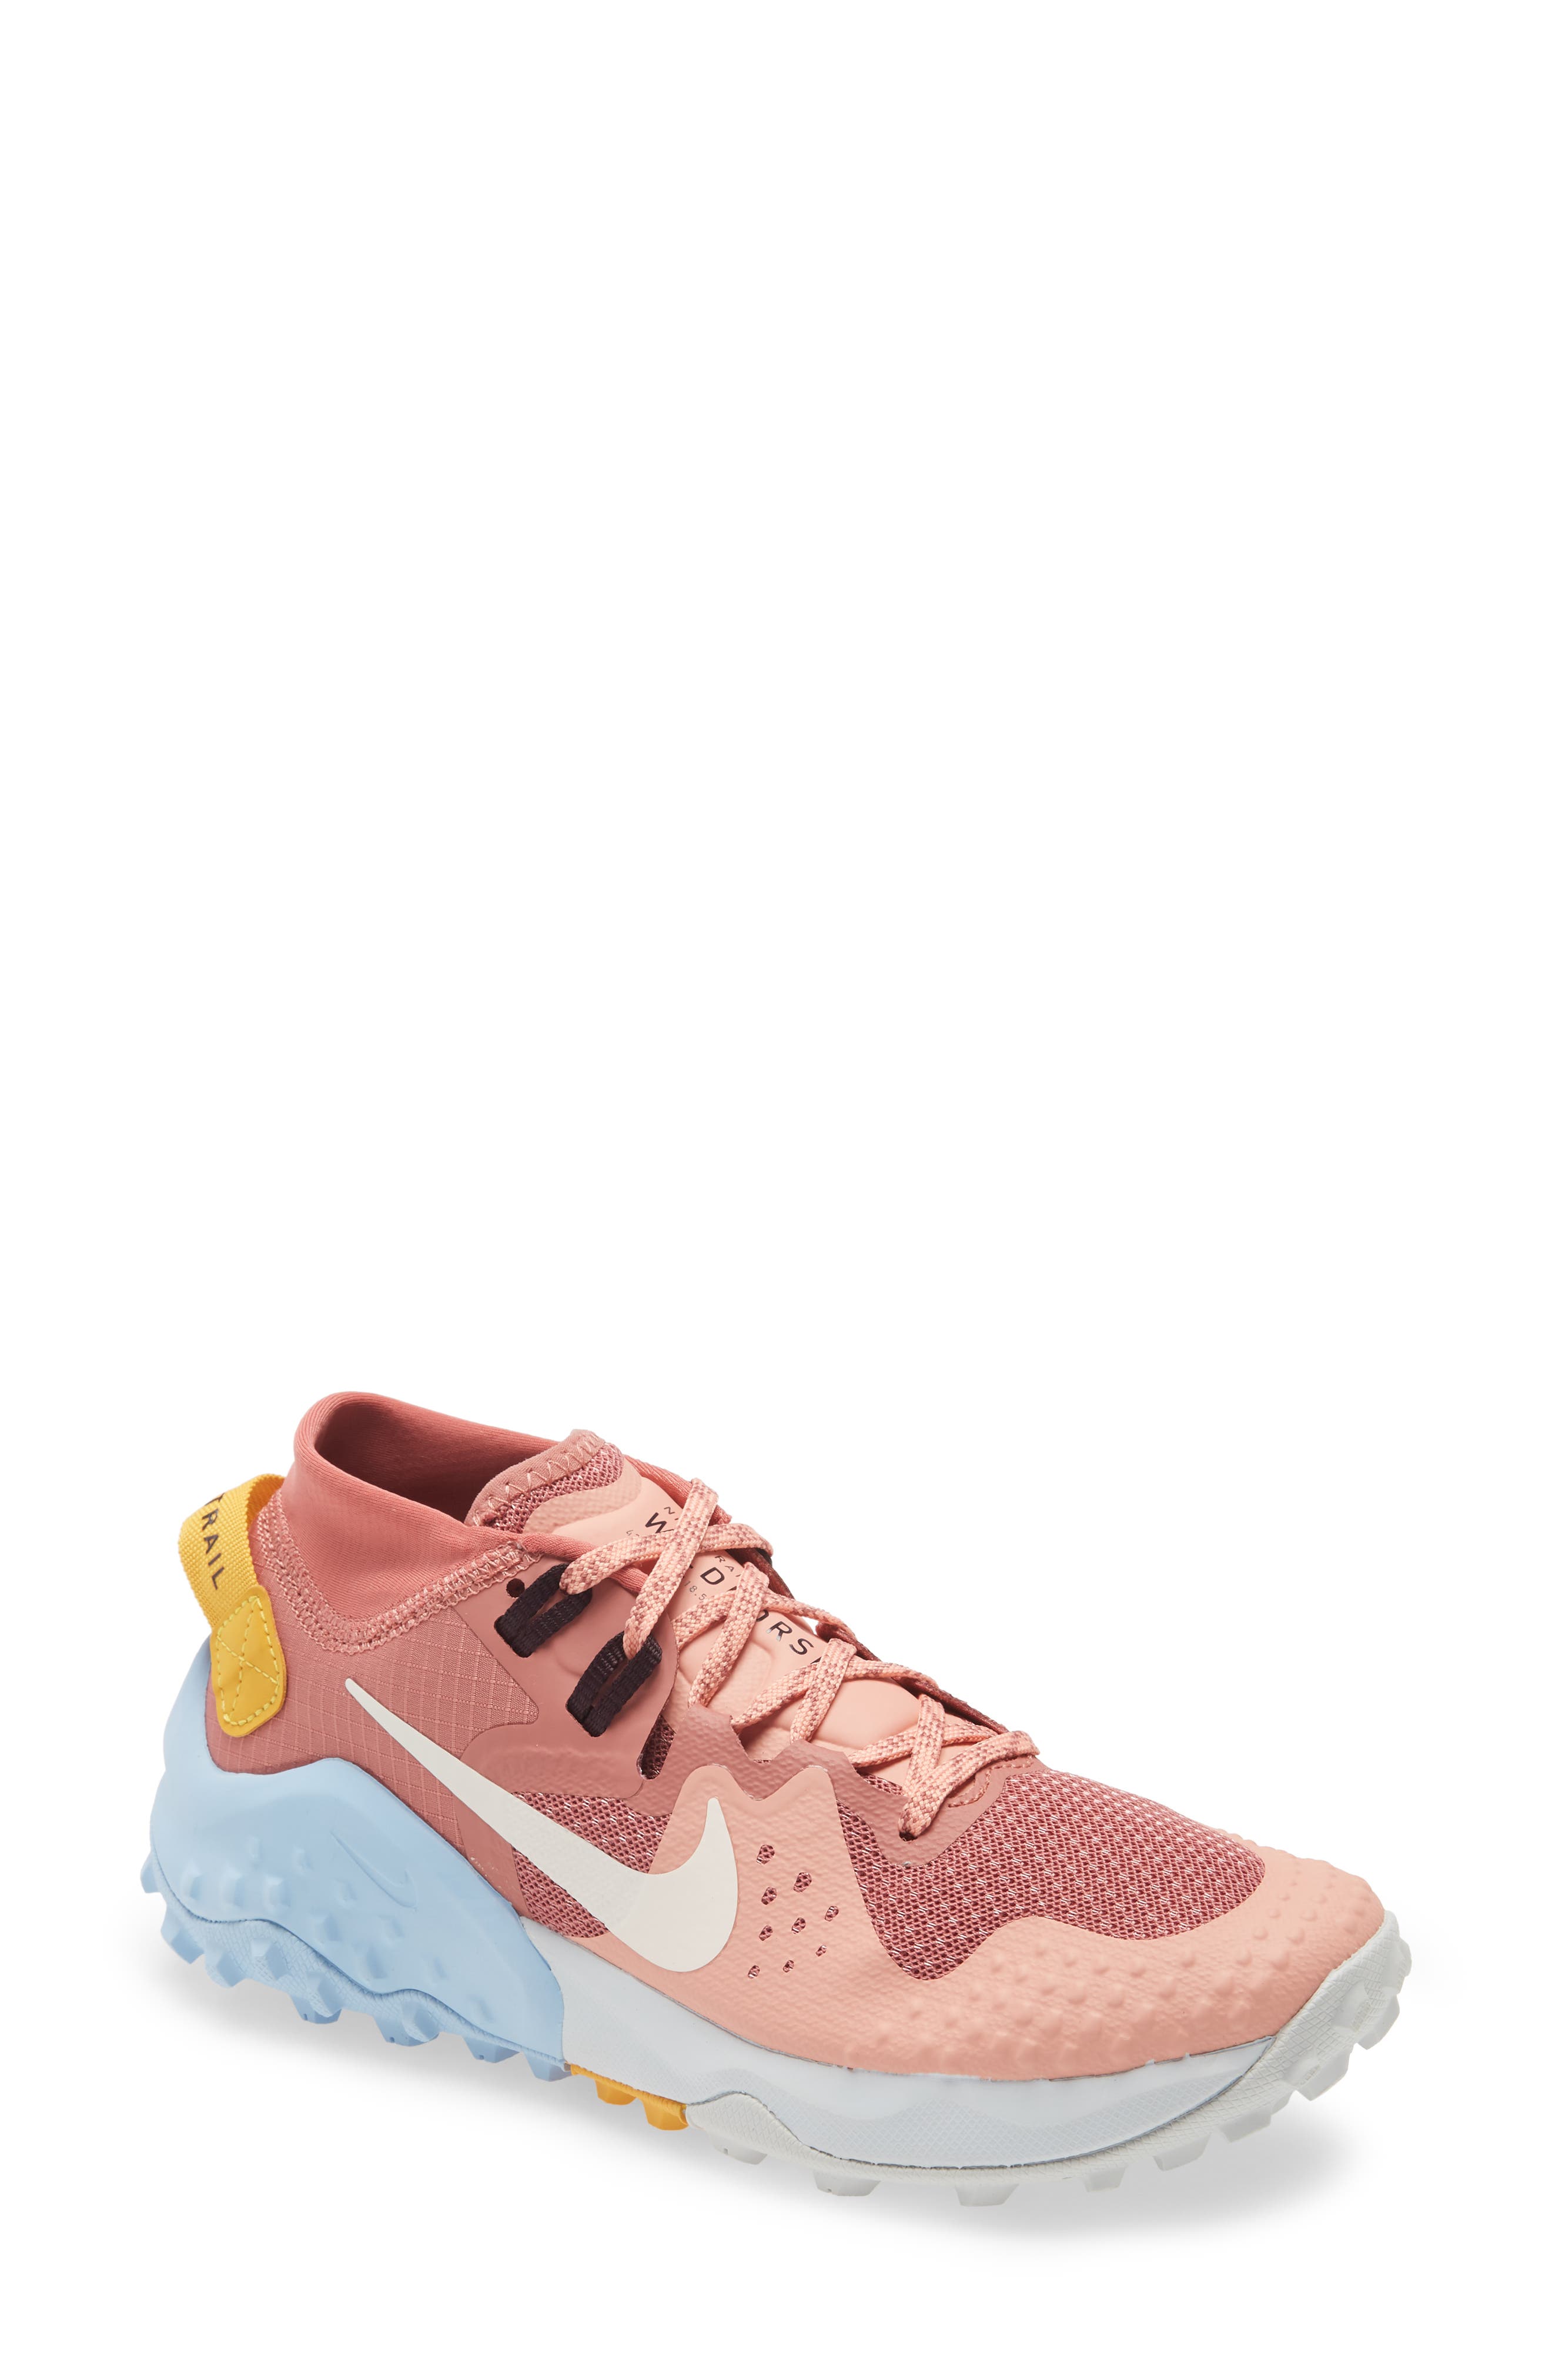 light pink workout shoes